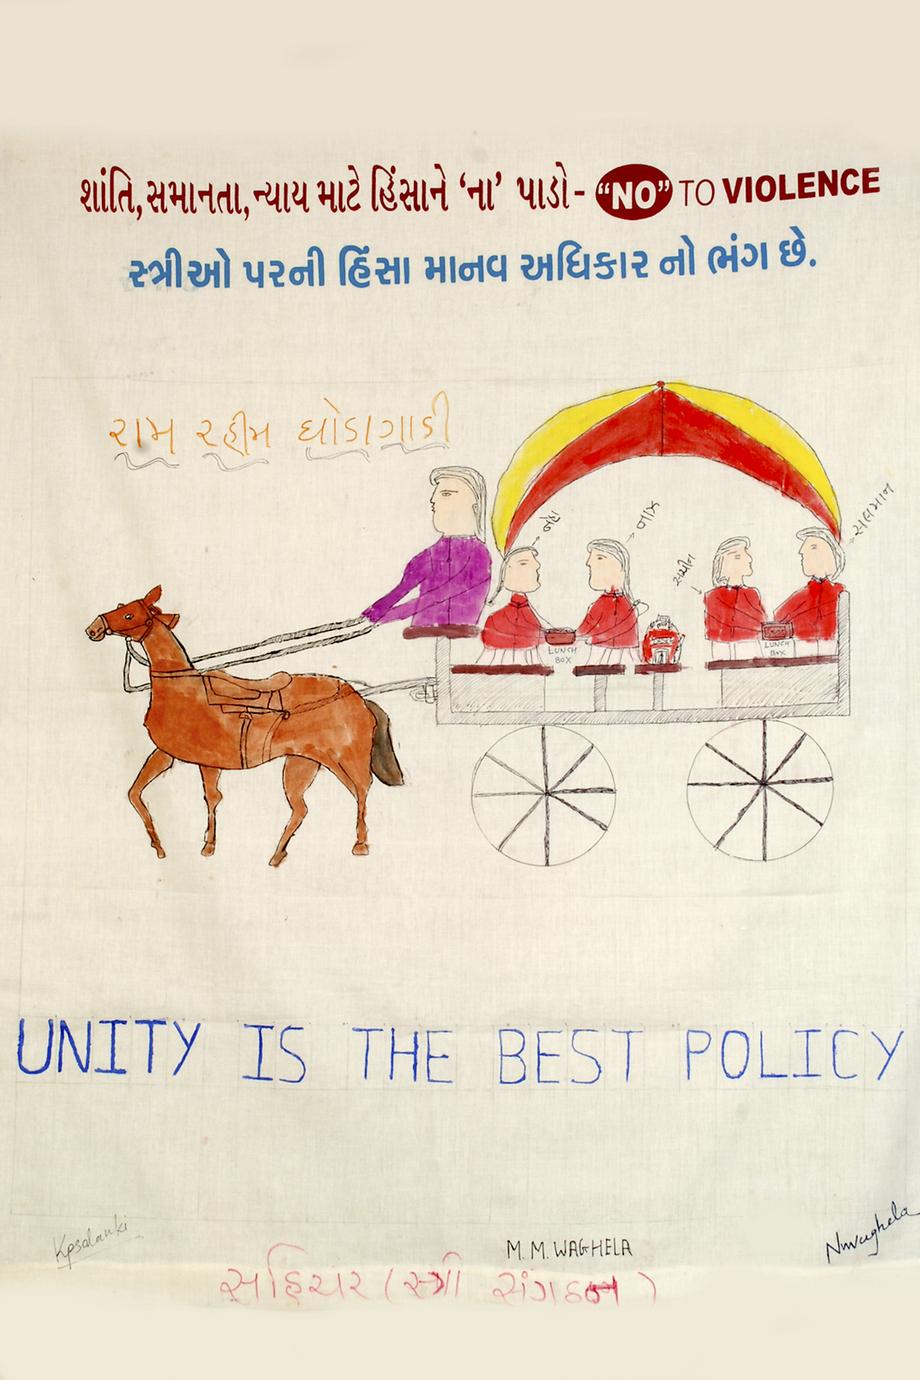 Unity is the best policy